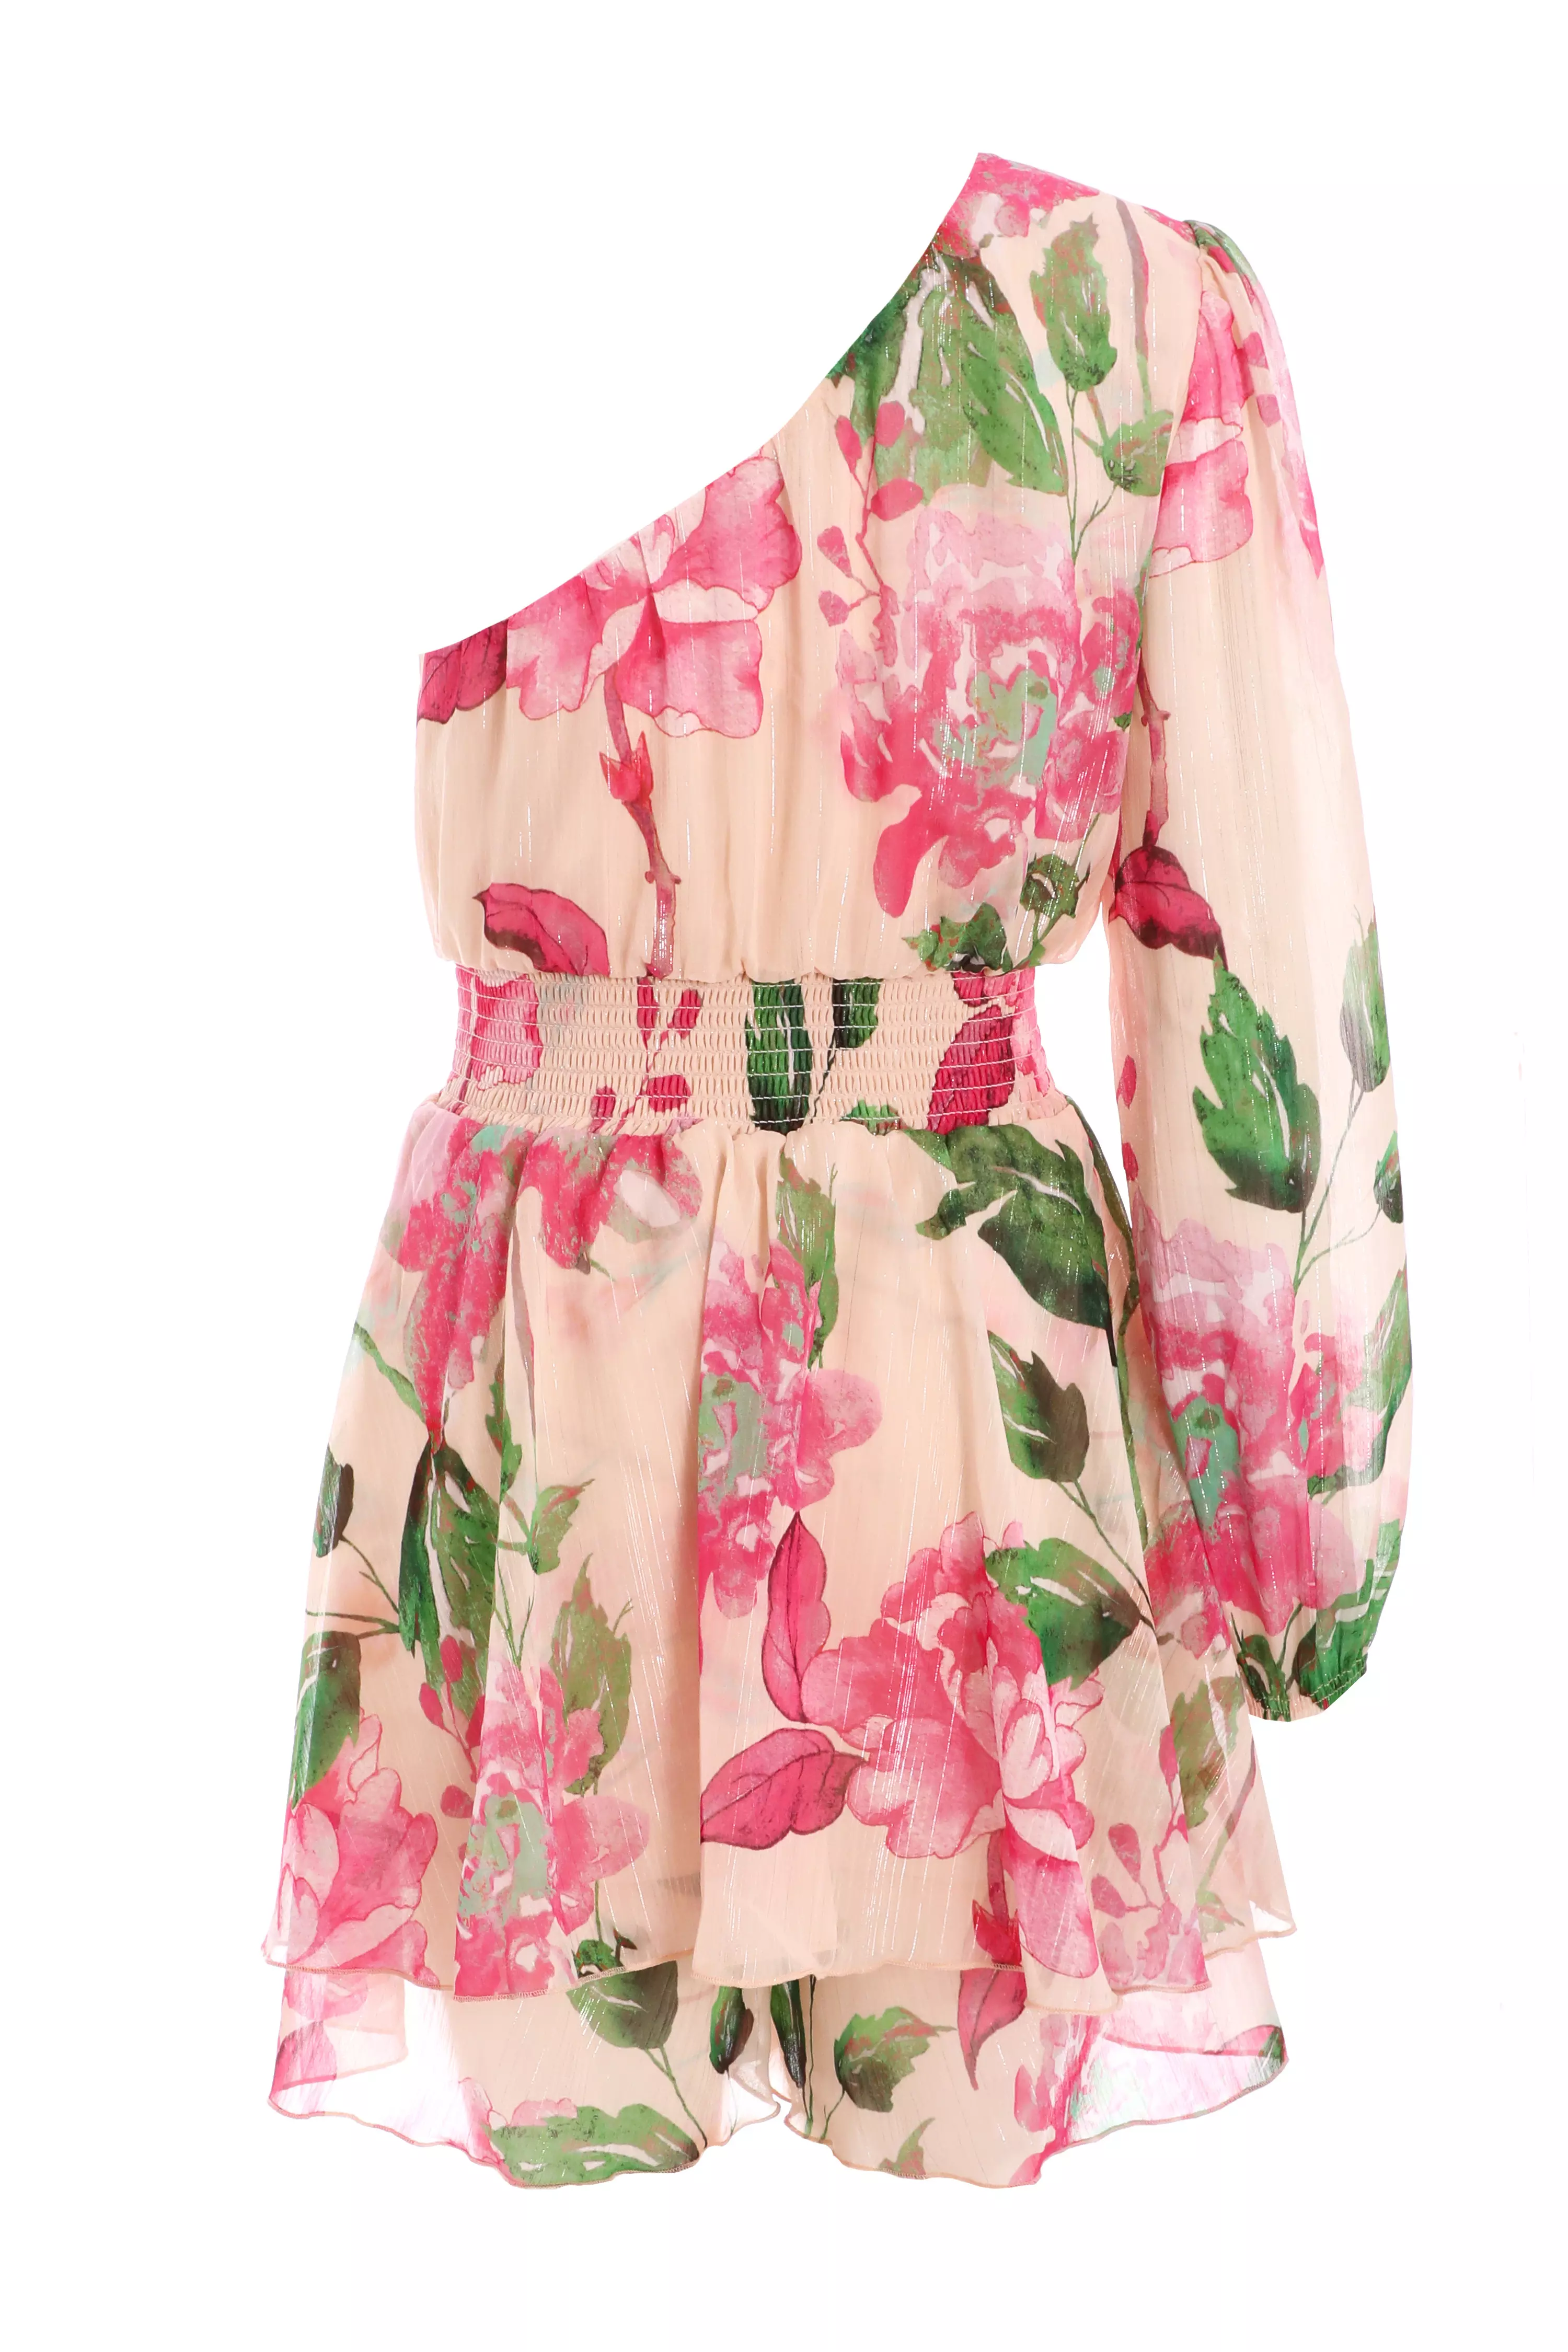 Nude Floral One Shoulder Chiffon Playsuit